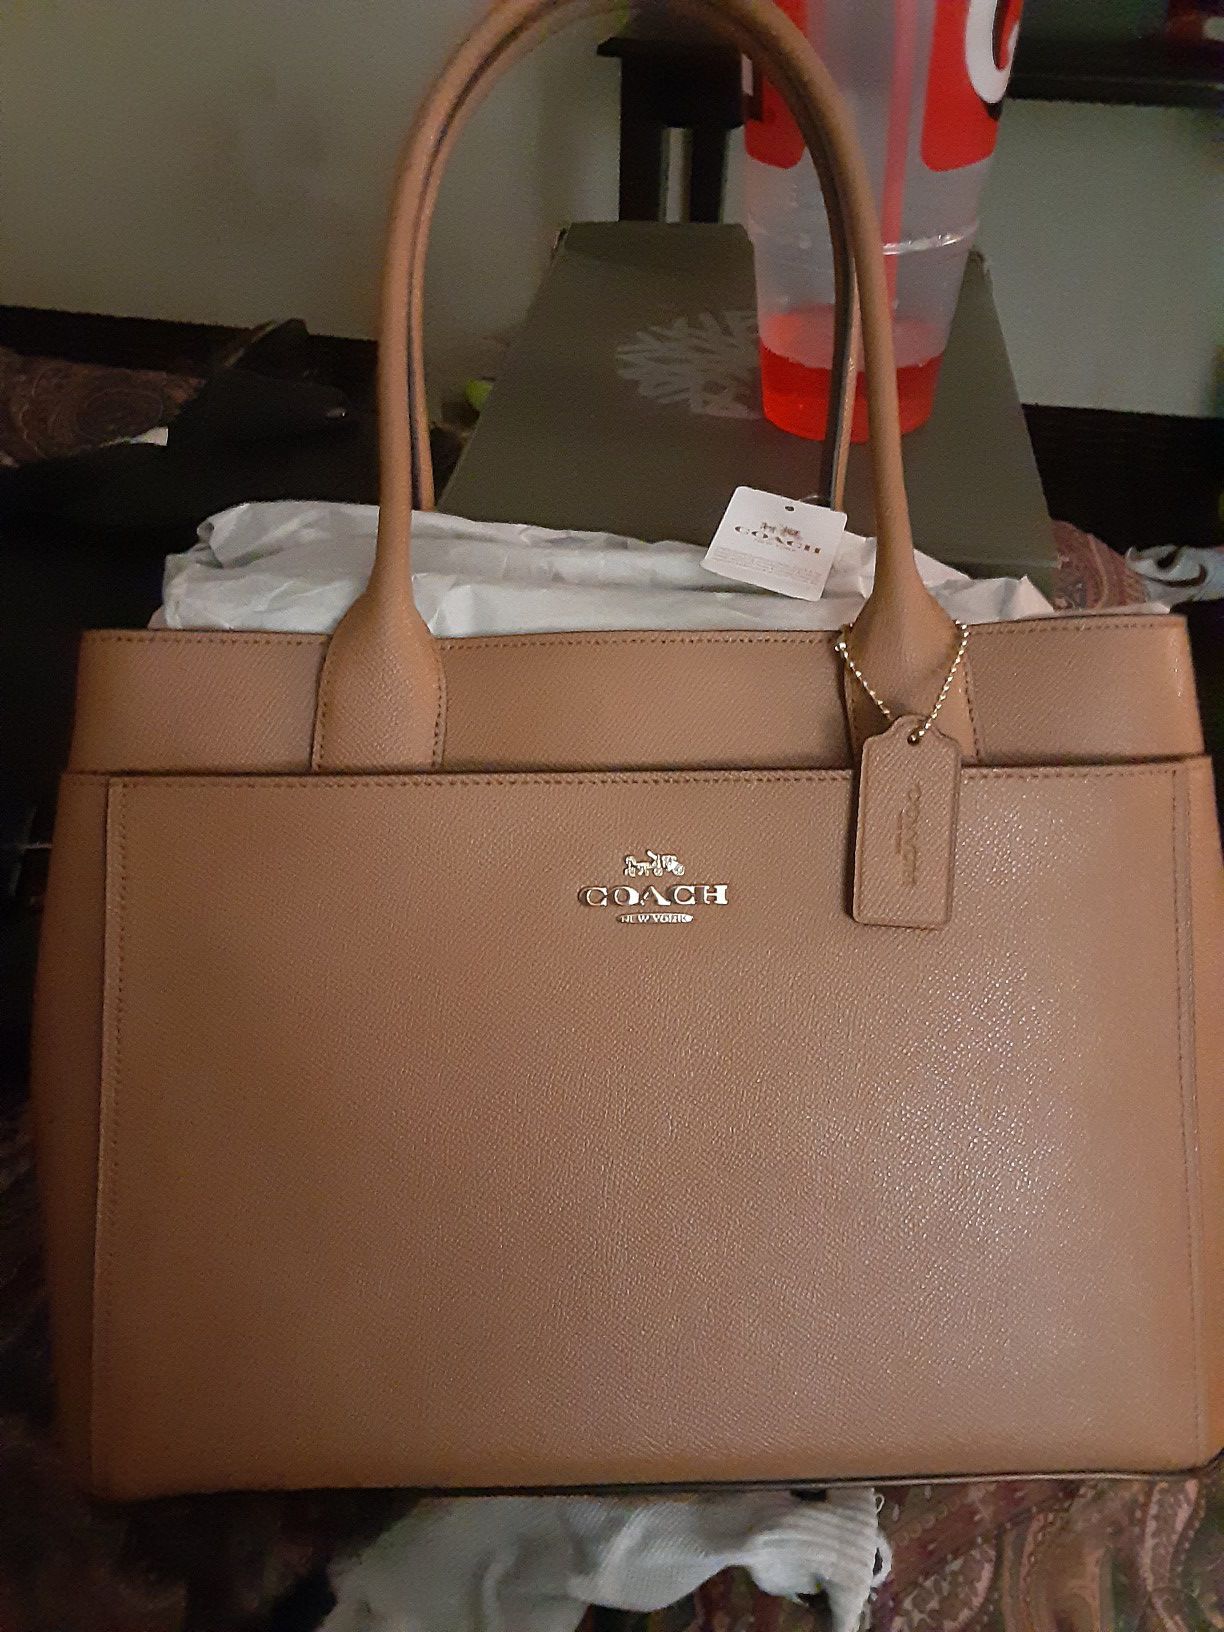 Coach purse 400 for 150 Vince camuto 180 for 80